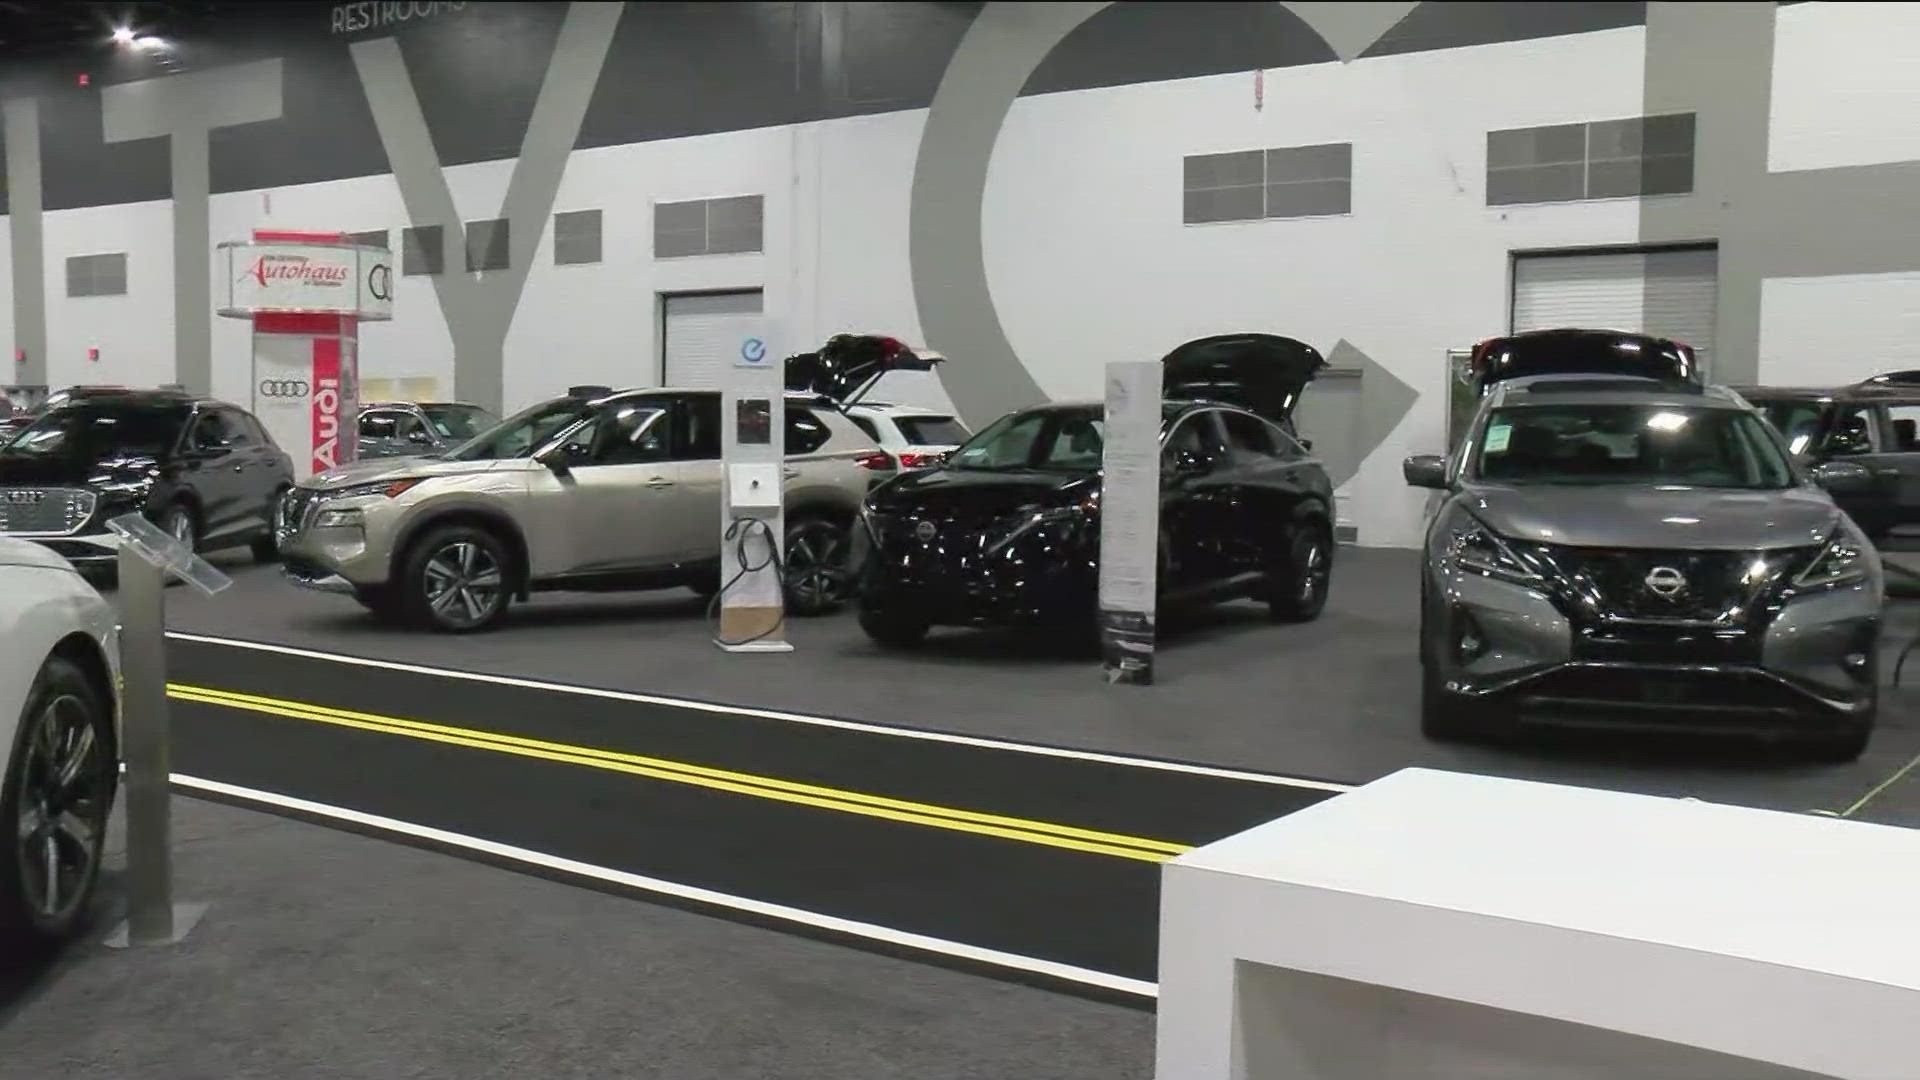 Our Zeinab Cheaib gives a sneak peak of the Toledo Auto Show before it debuts tomorrow!